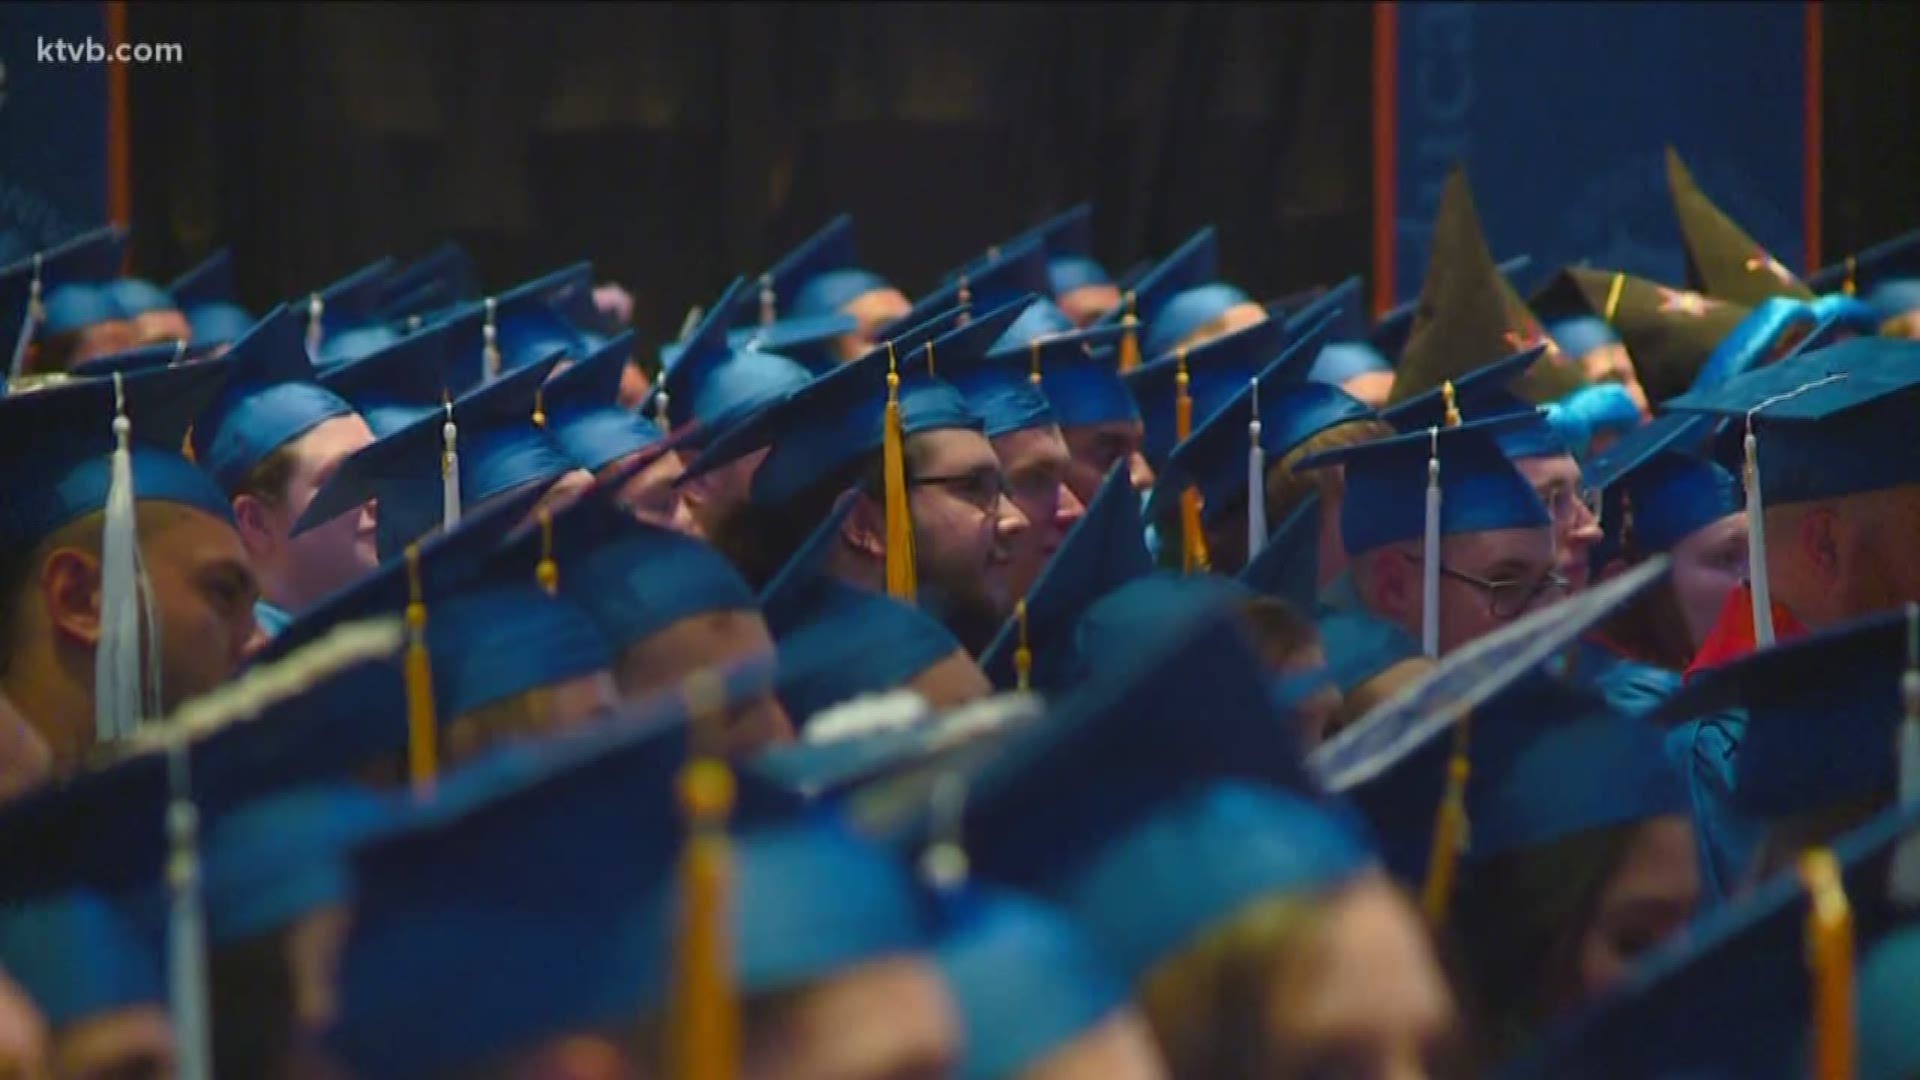 Researchers say many Idaho high school graduates intend to go on to college or technical school, but never follow through.